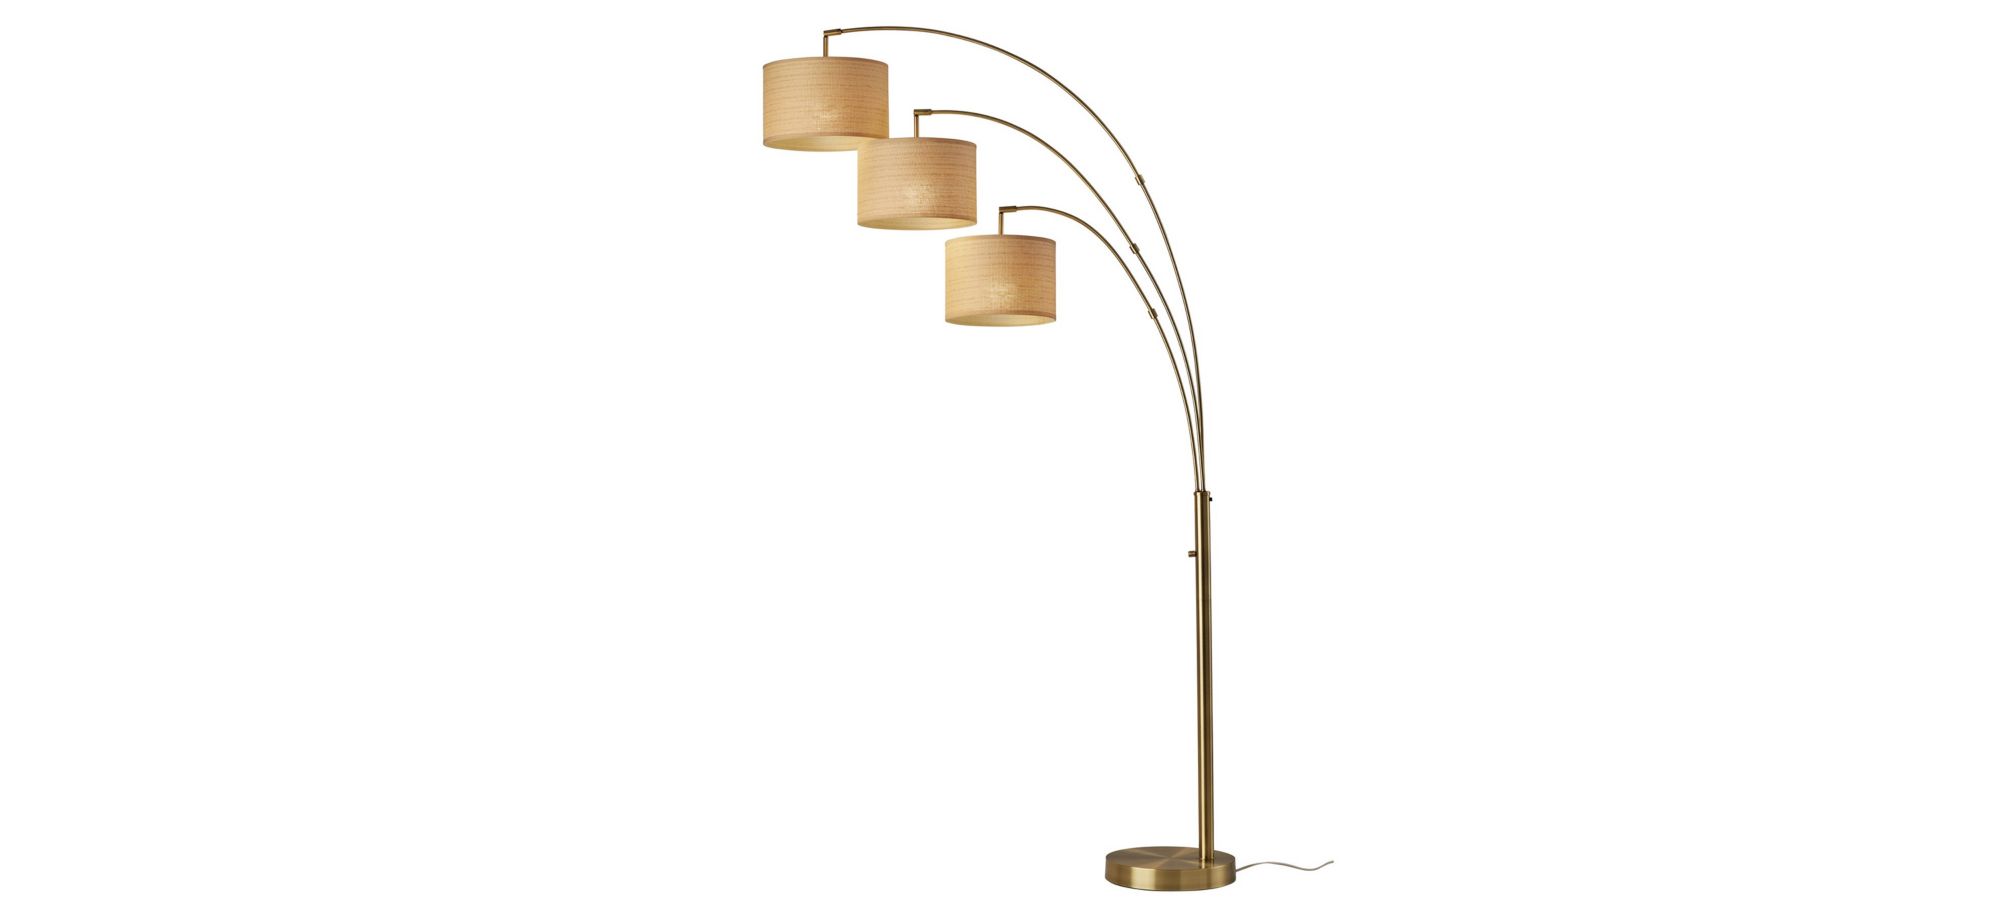 Bowery 3-Arm Arc Lamp in Antique Brass with Natural Shade by Adesso Inc